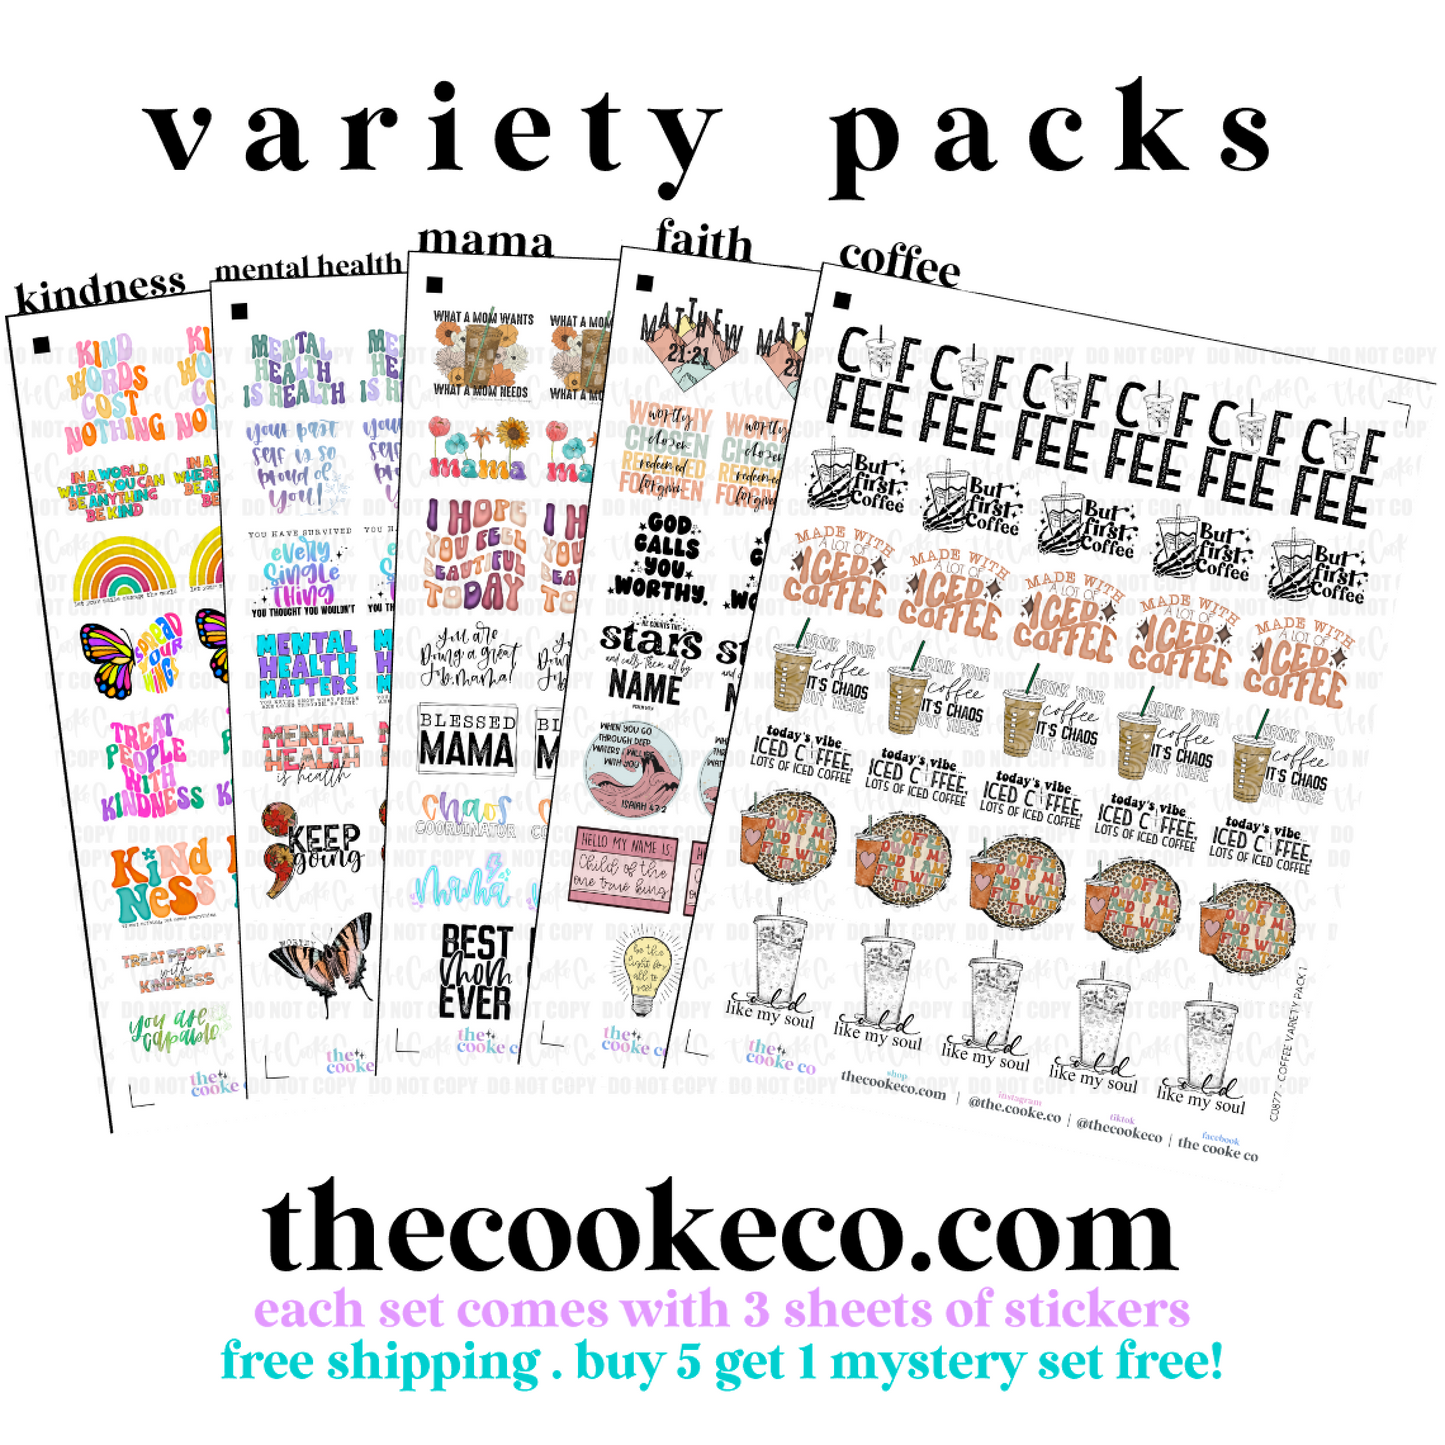 PTO Packaging Stickers | Themed Variety Packs